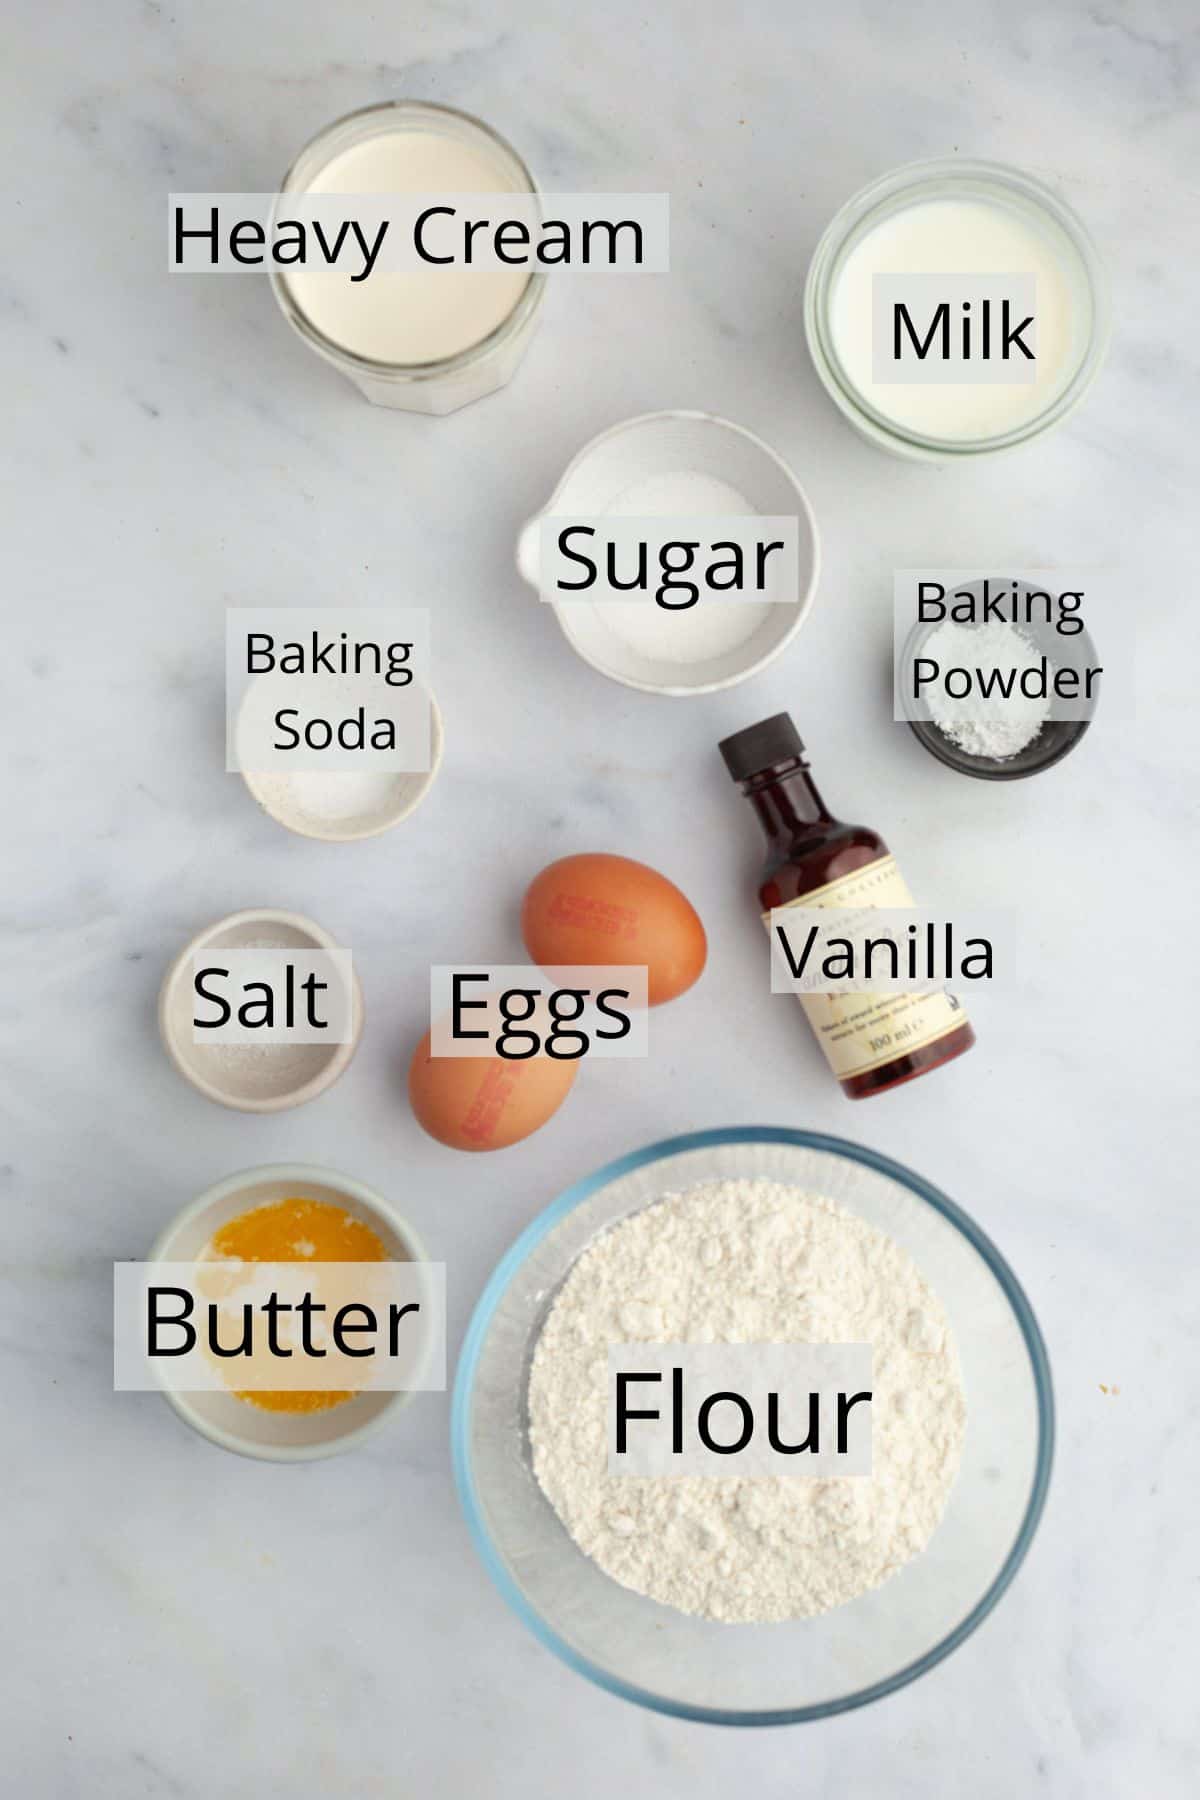 All the ingredients needed to make sweet cream pancakes, weighed out into small bowls.